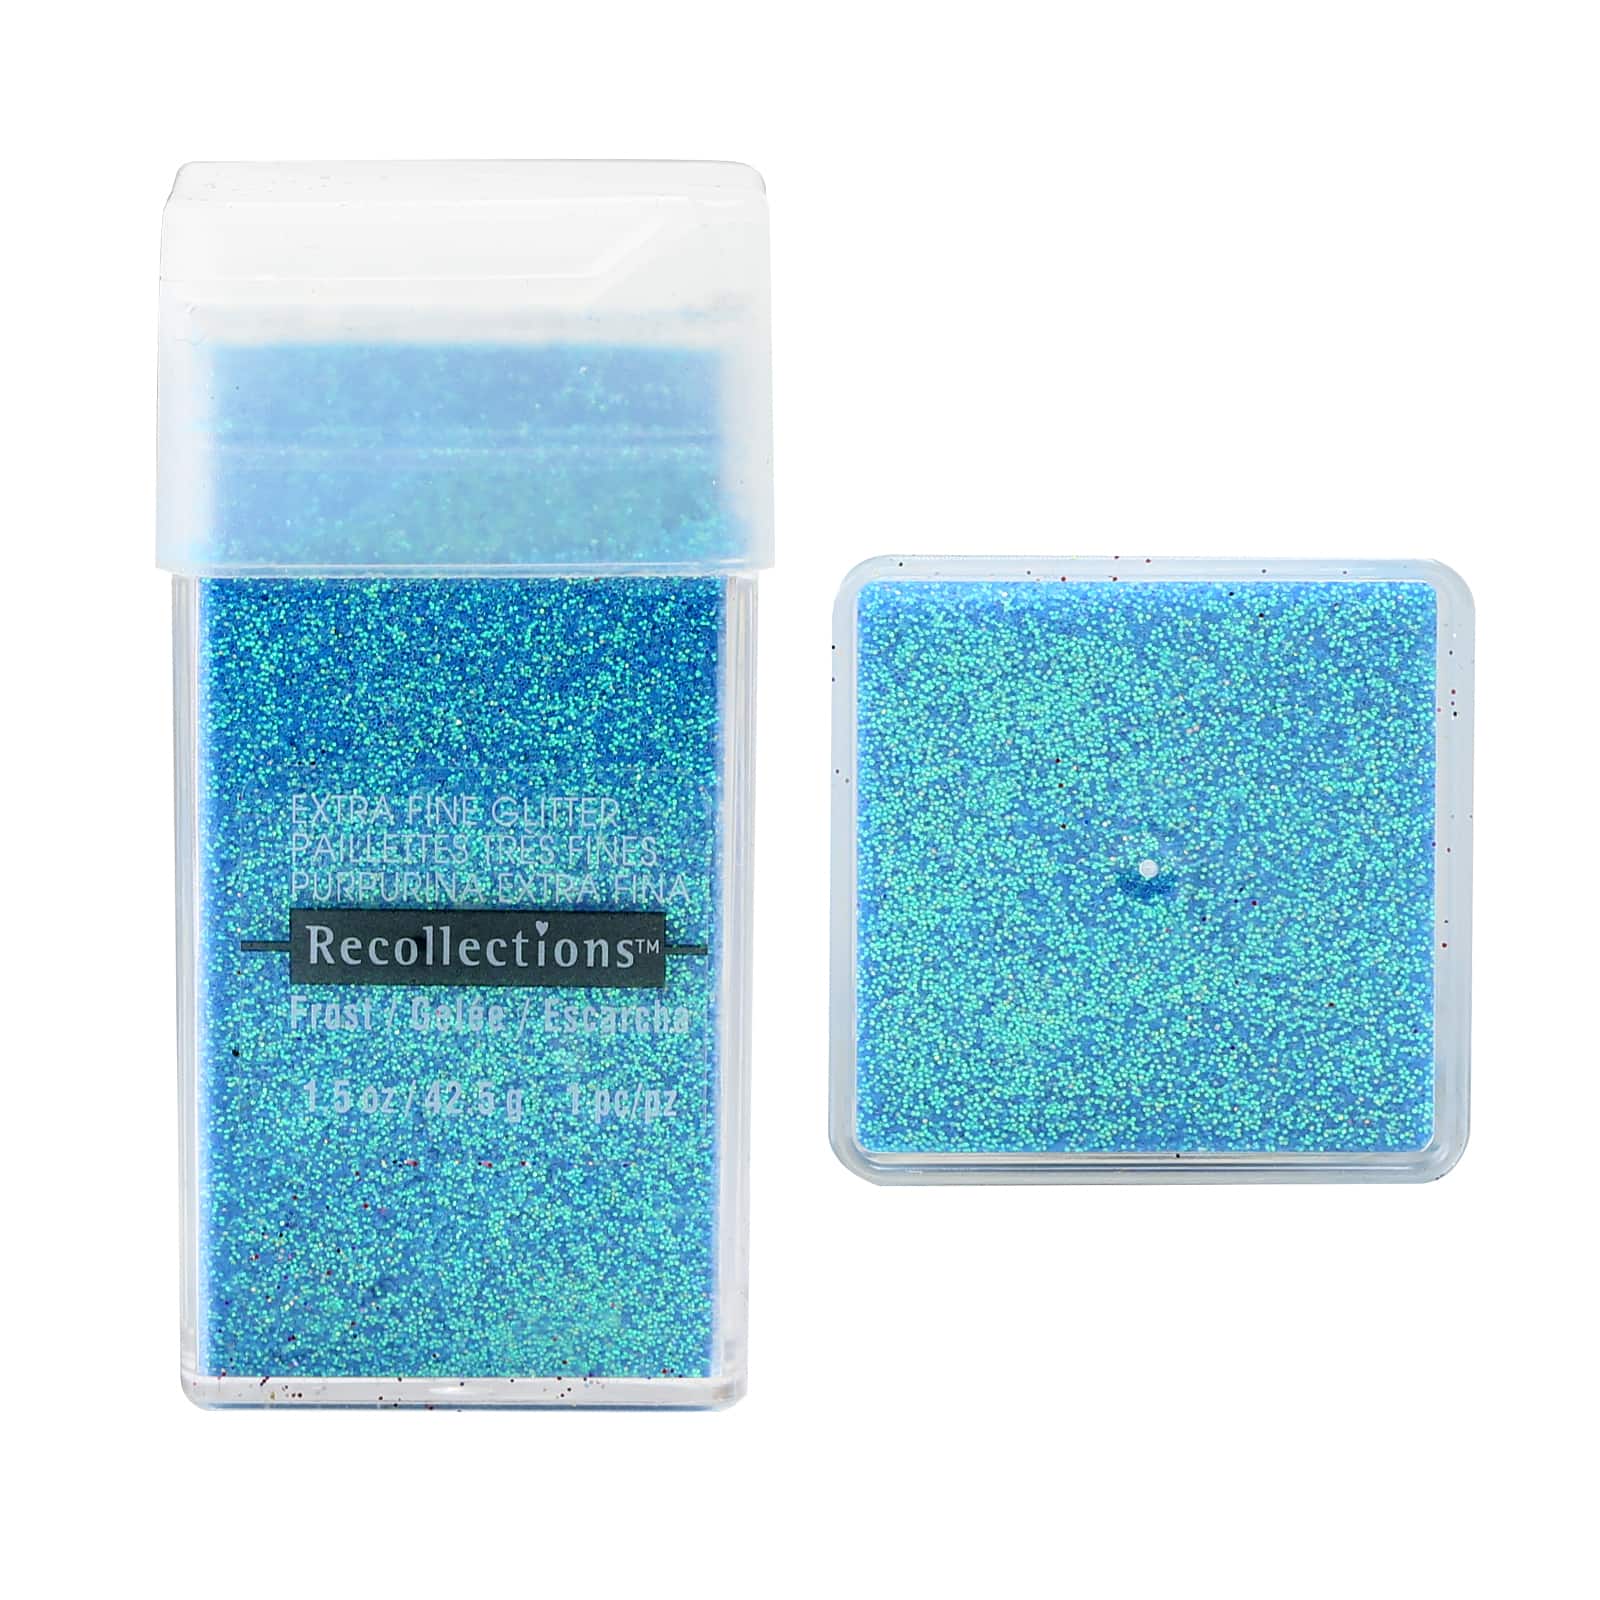 Recollections Specialty Glitter Glow-in-the-Dark Stars - 1.06 oz